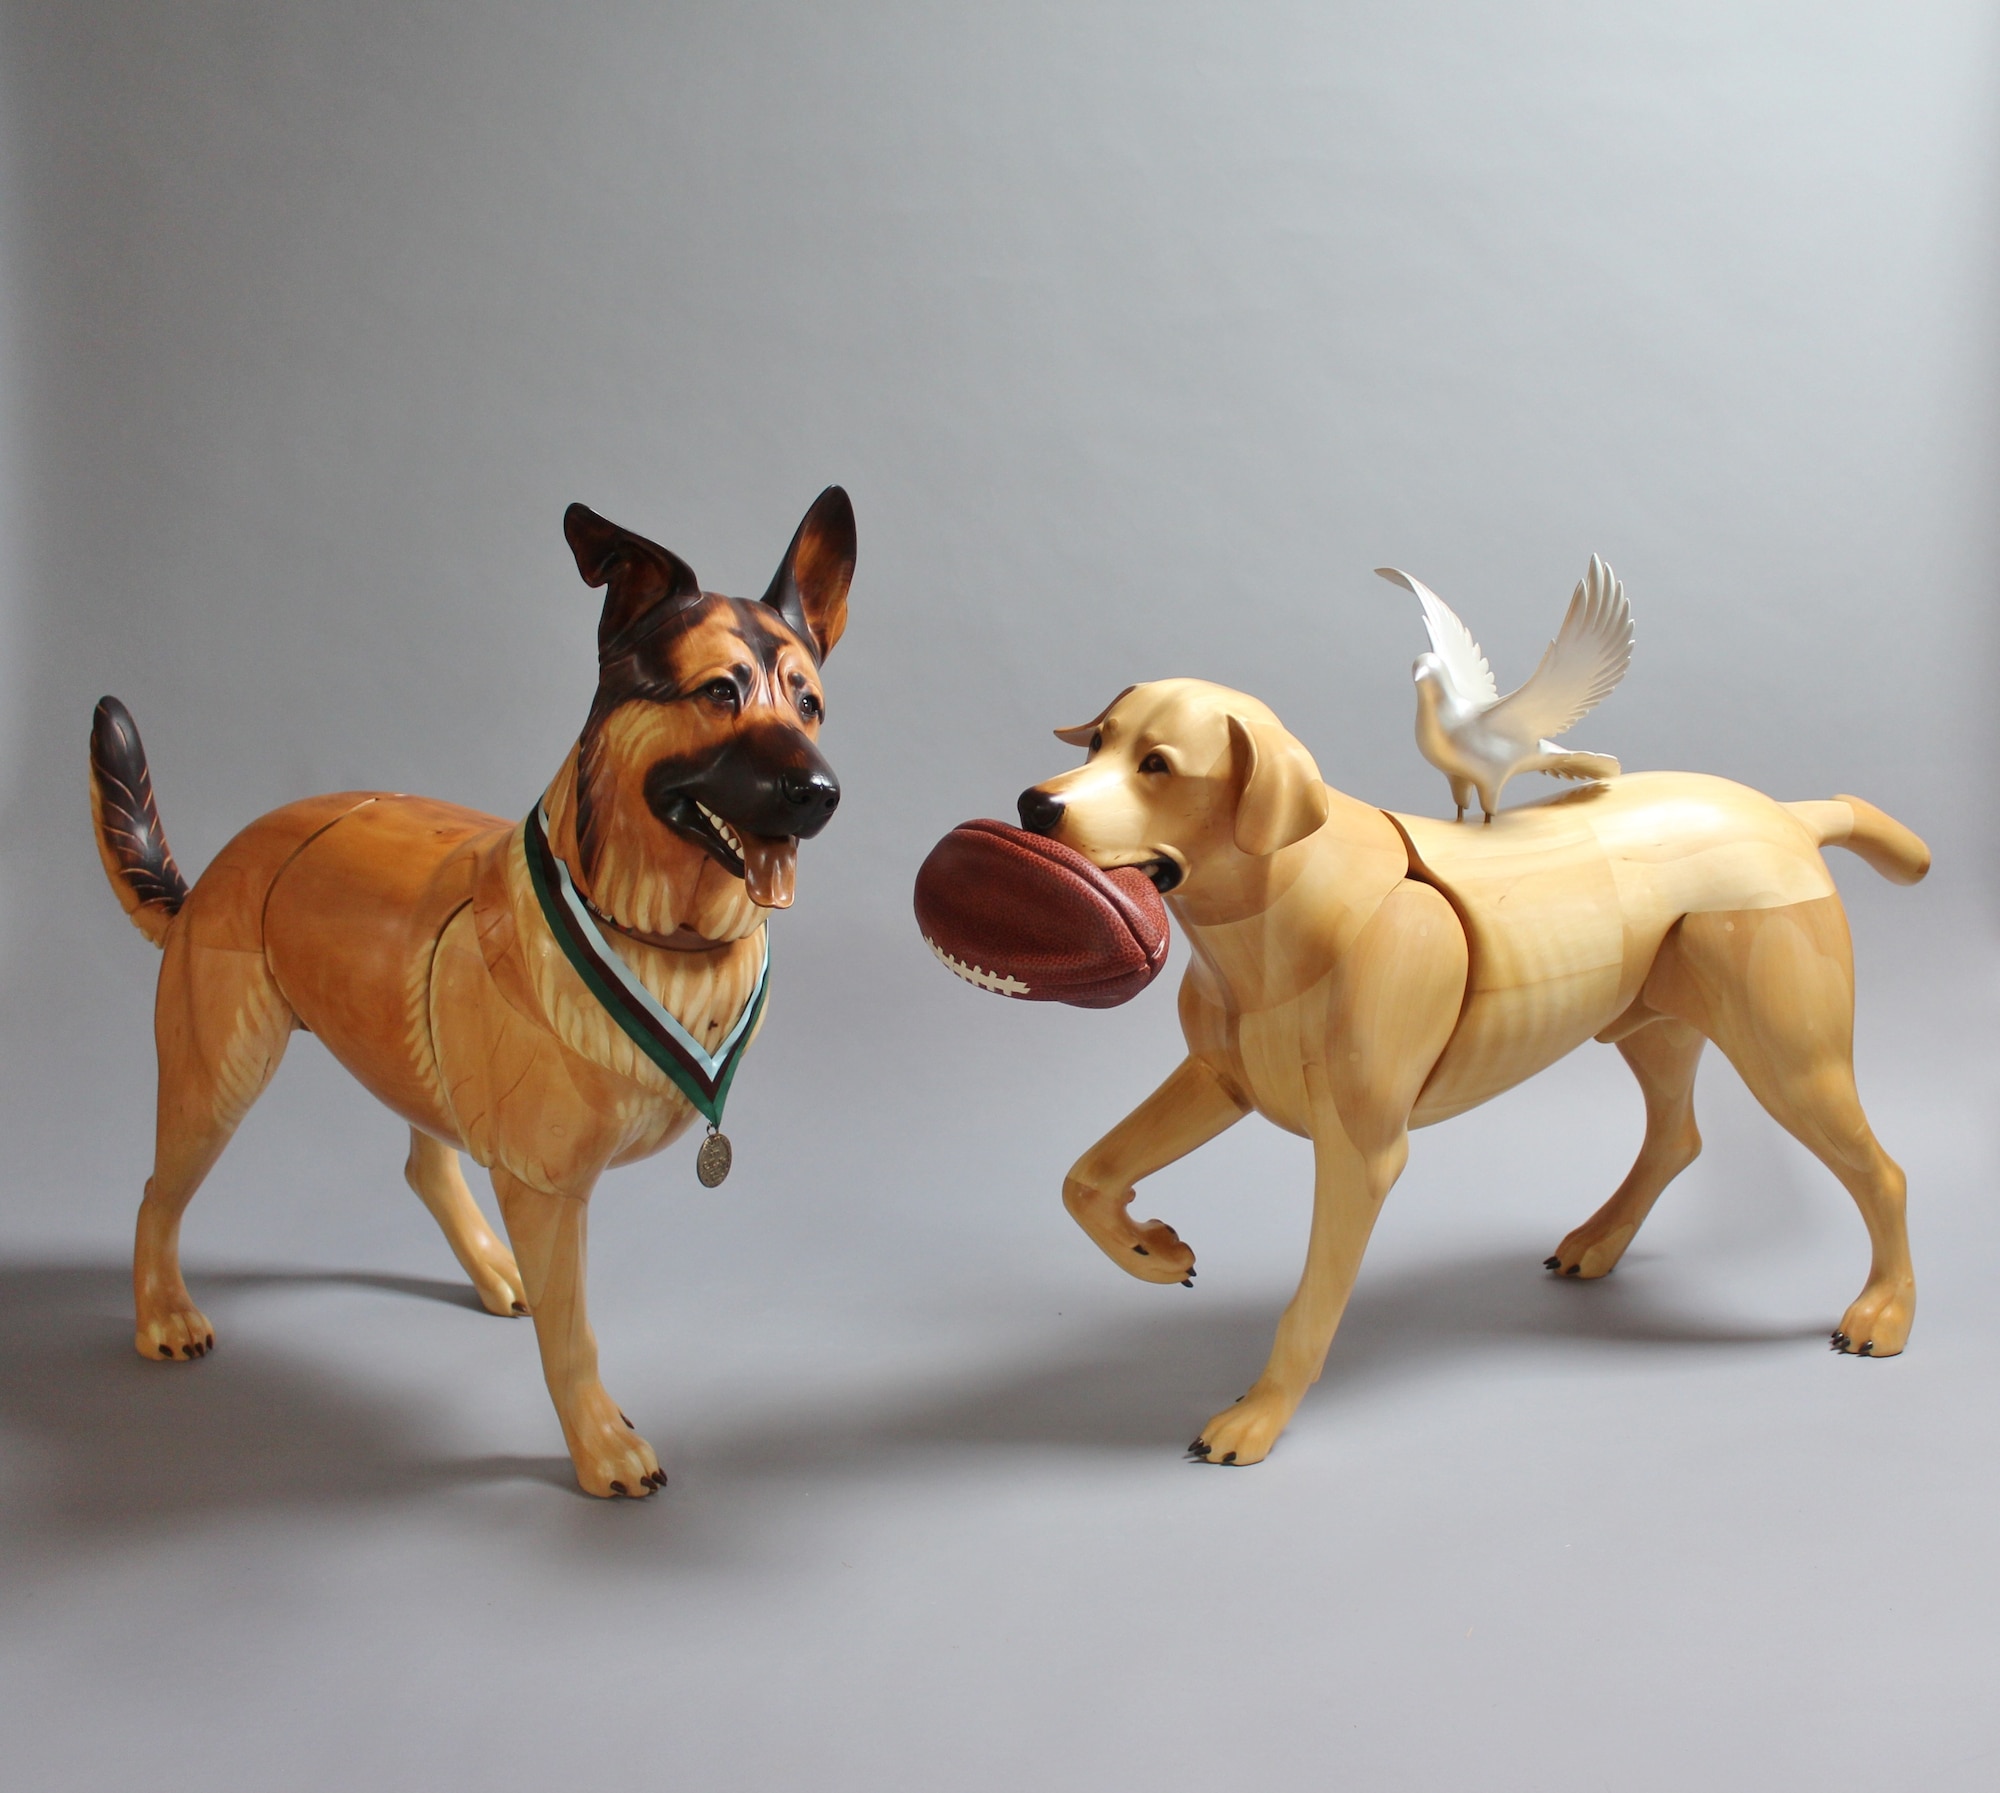 Picture of wooden sculpture dogs. The dog on the left, Lucca, has his front leg amputated and is wearing a medal around her neck. The dog on the right, Cooper, has a deflated football in her mouth and a white dove on her back.